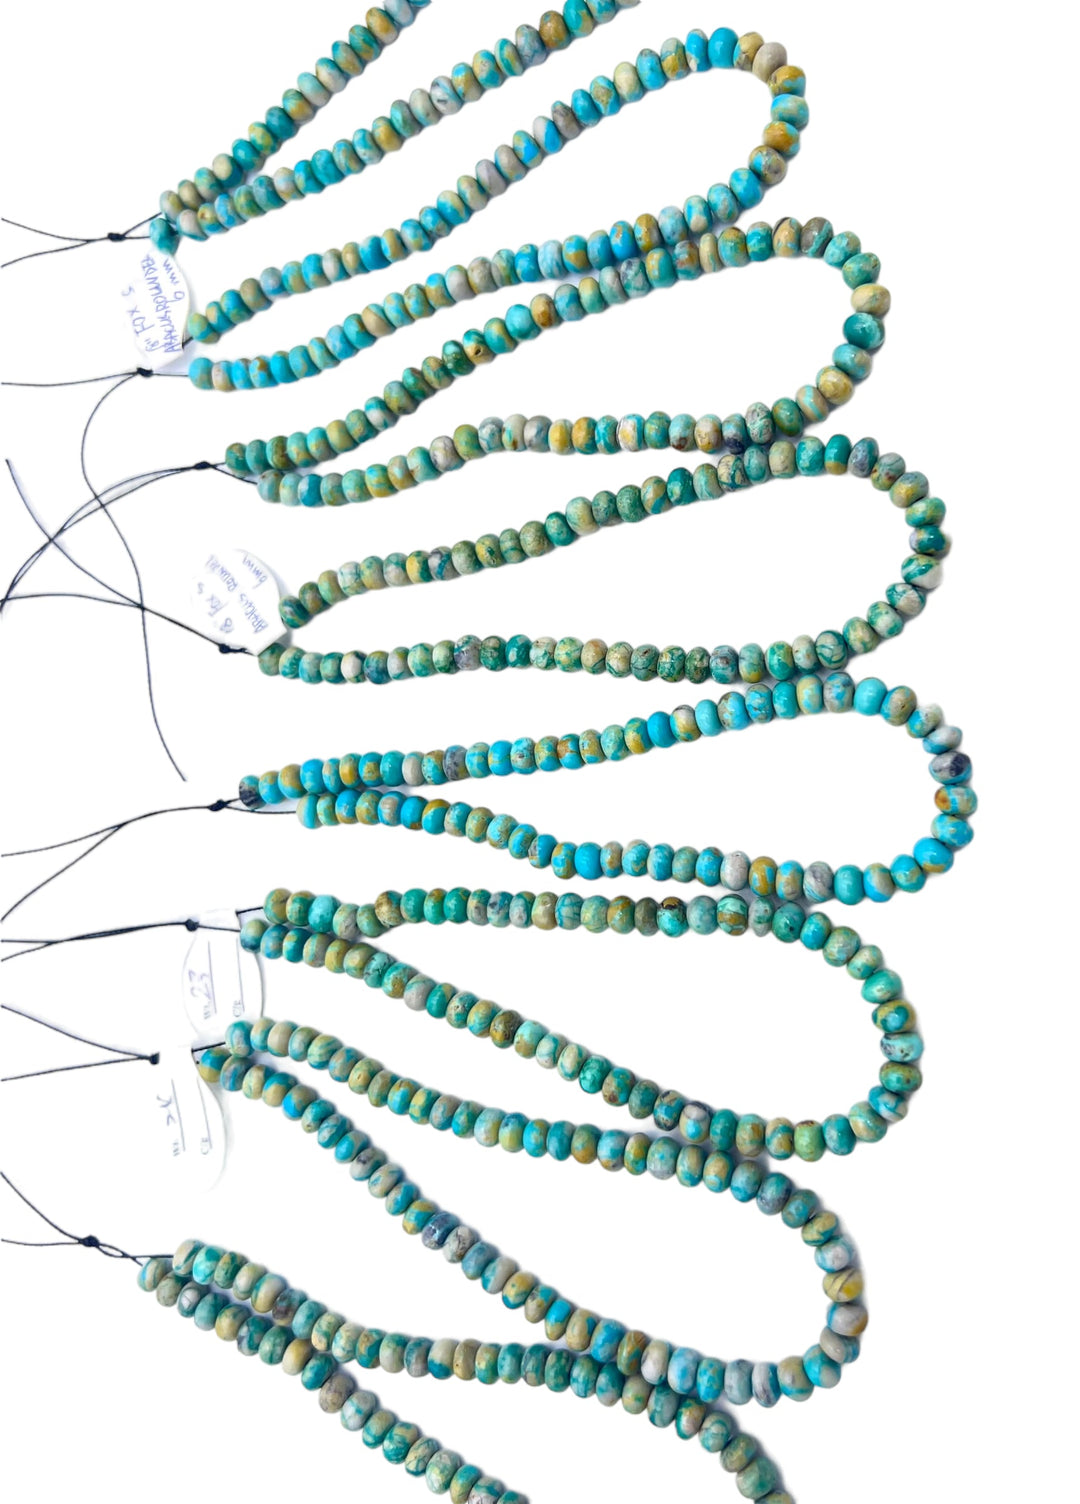 RARE Nevada Fox Turquoise 6mm Rondelle Beads 9 inch strand -